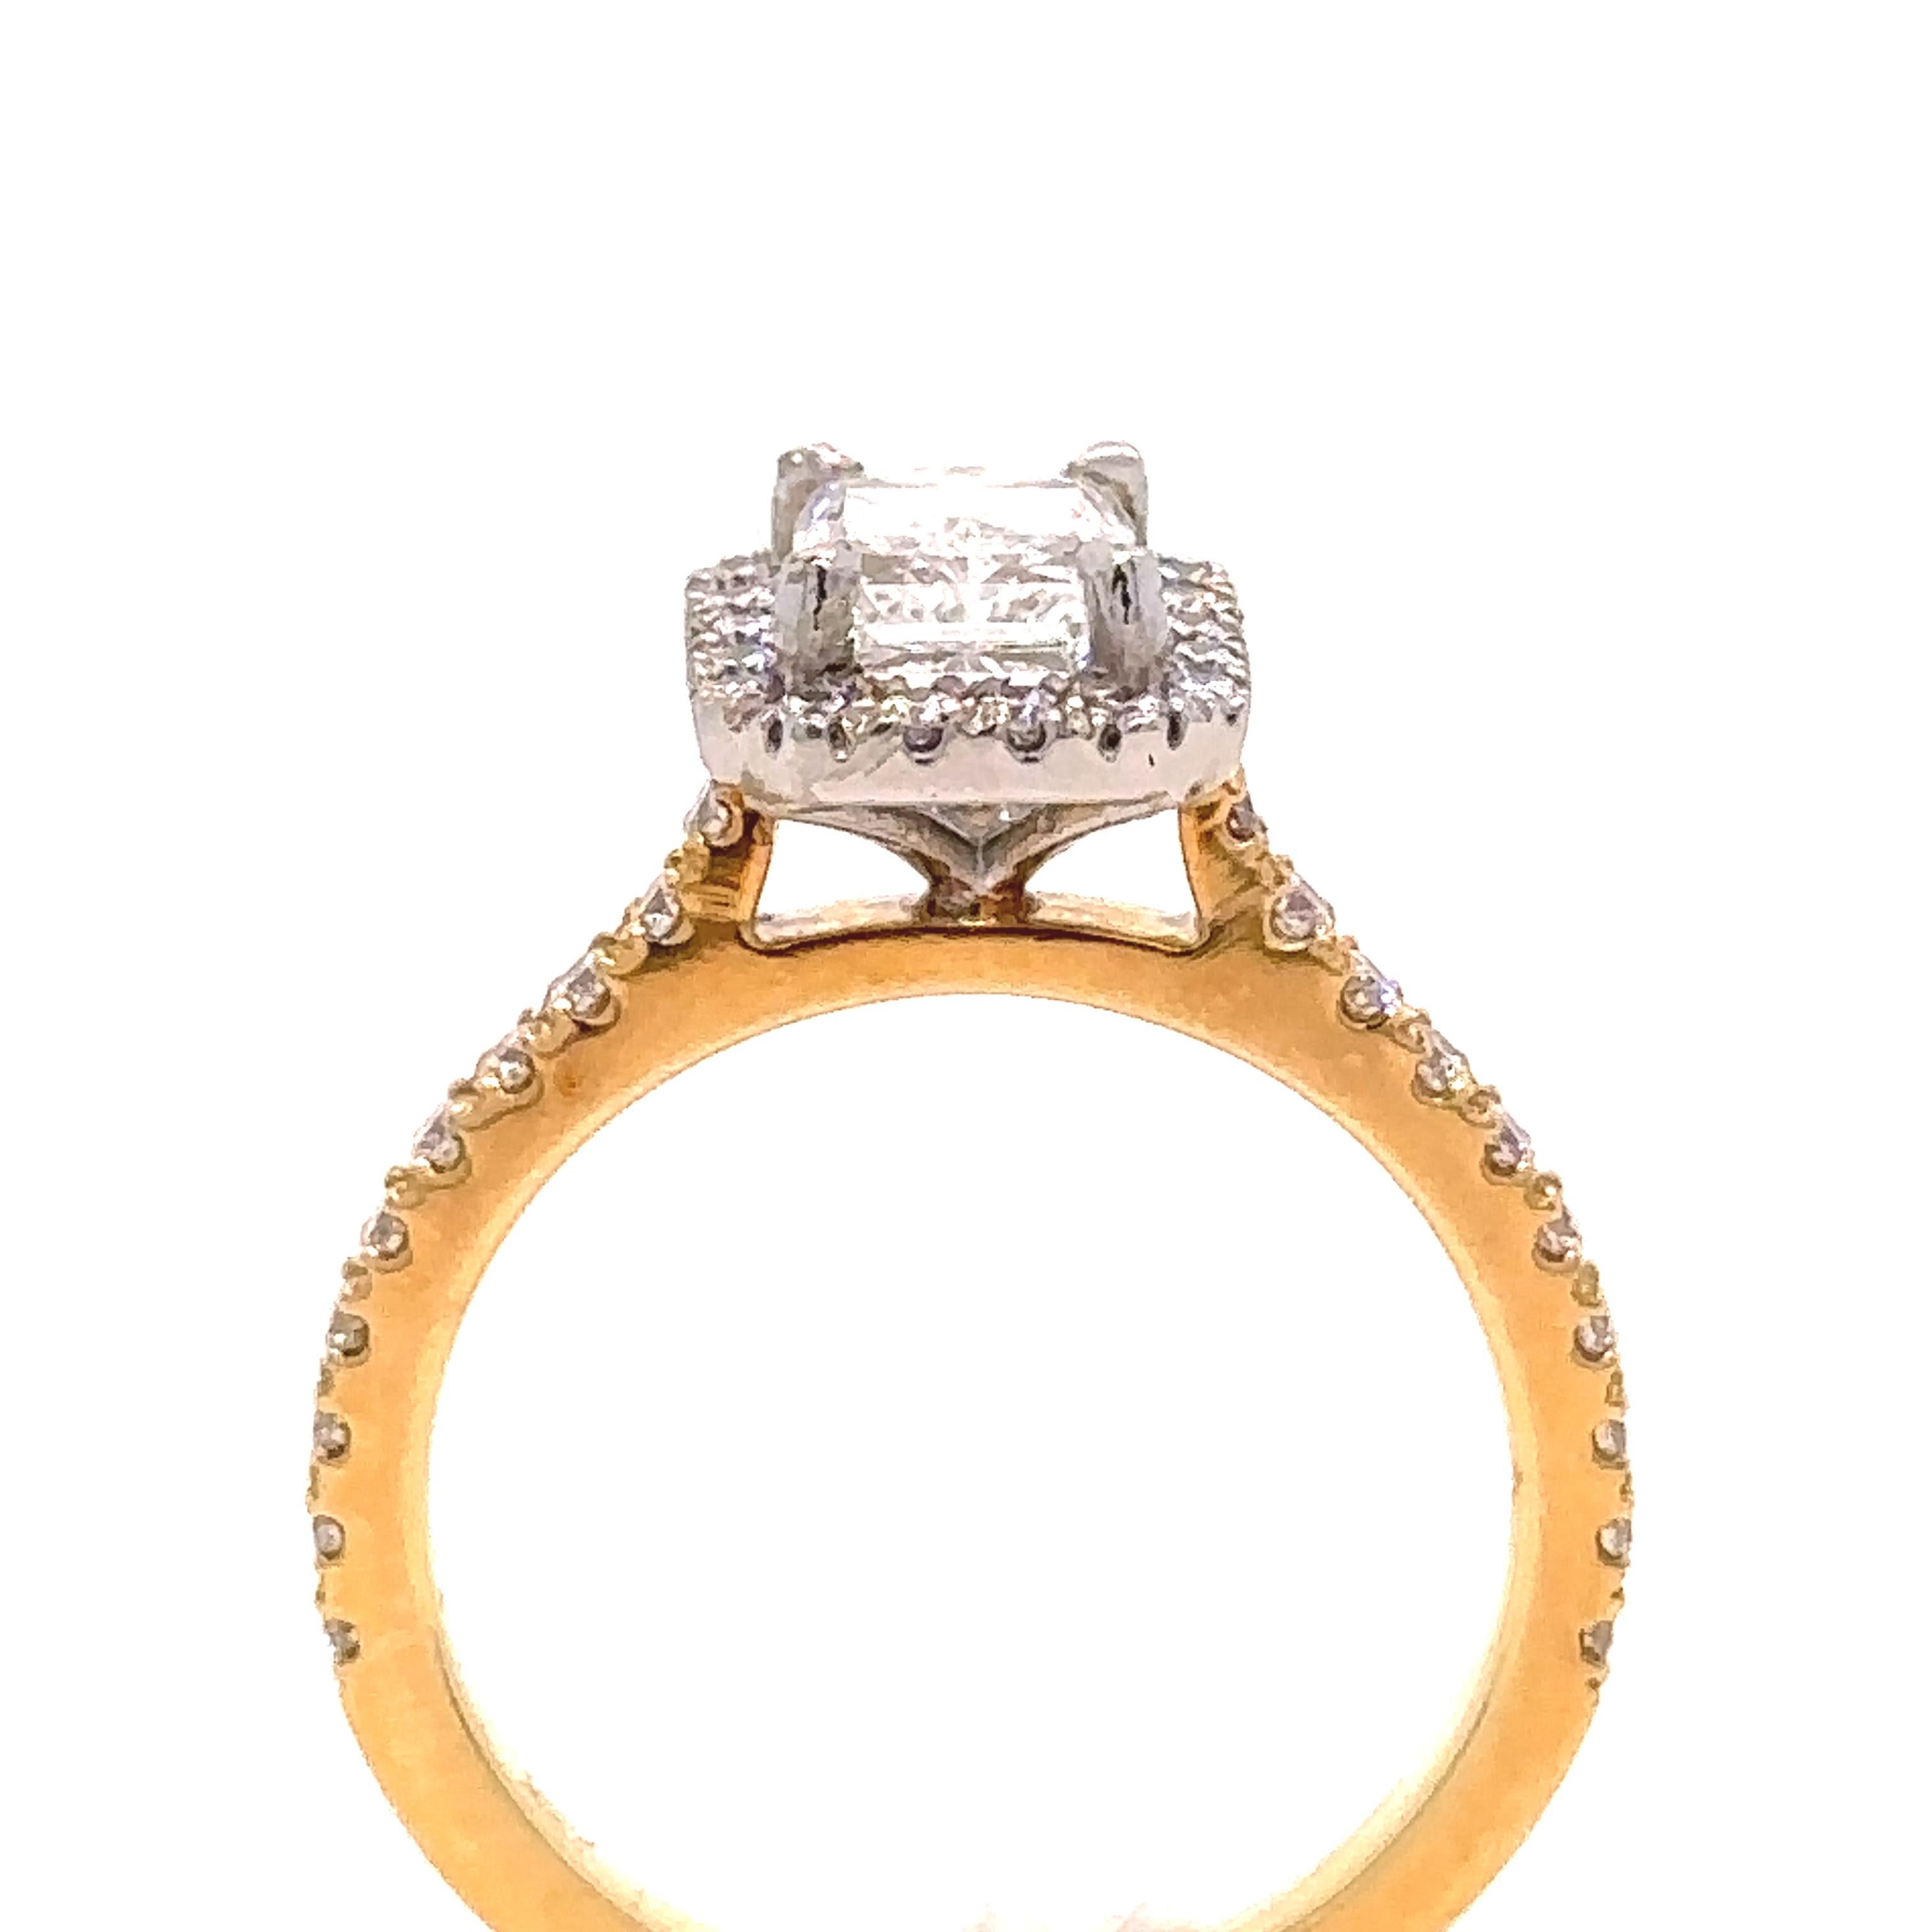 Unique features:

Custom made solid 18ct yellow gold band and white gold Halo design diamond engagement ring.

Centre Cut-Cornered Rectangular Modified Brilliant diamond set in four claw Tiger setting is GIA certified, Laser Inscribed #1438574444,